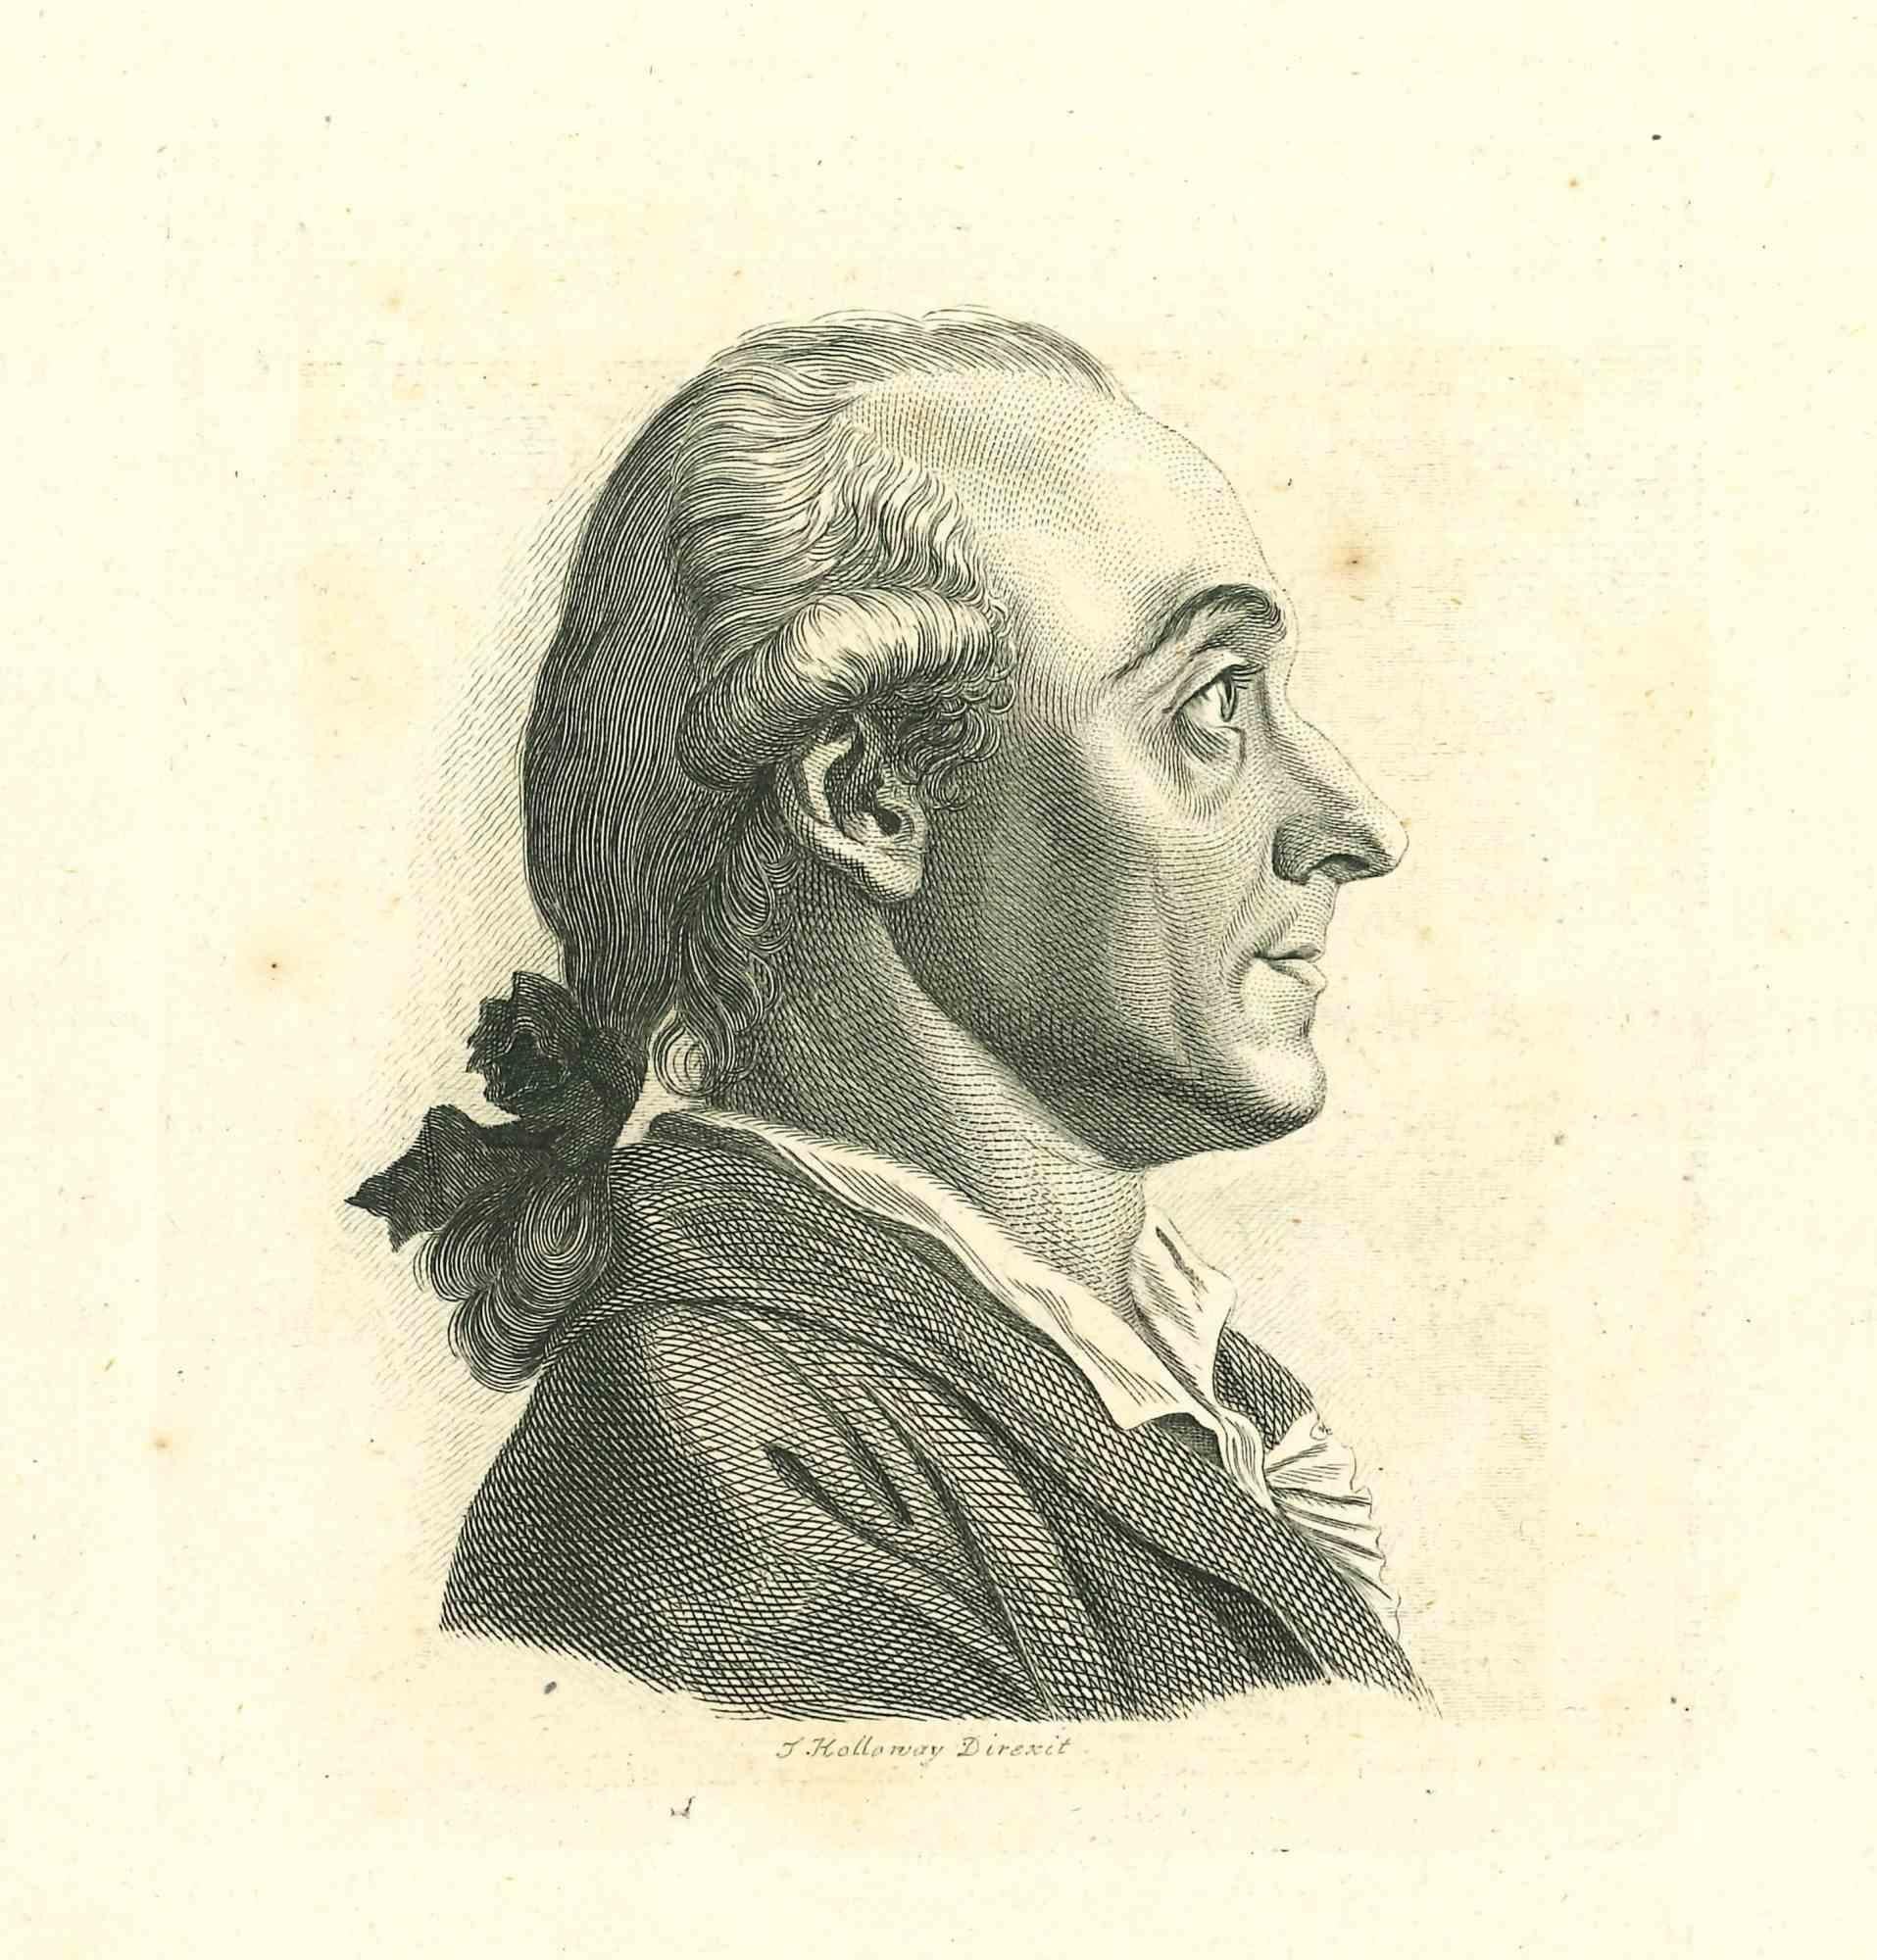 Portrait of a man is an original artwork realized by Thomas Holloway for Johann Caspar Lavater's "Essays on Physiognomy, Designed to promote the Knowledge and the Love of Mankind", London, Bensley, 1810.  

This artwork portrays a man. On the back